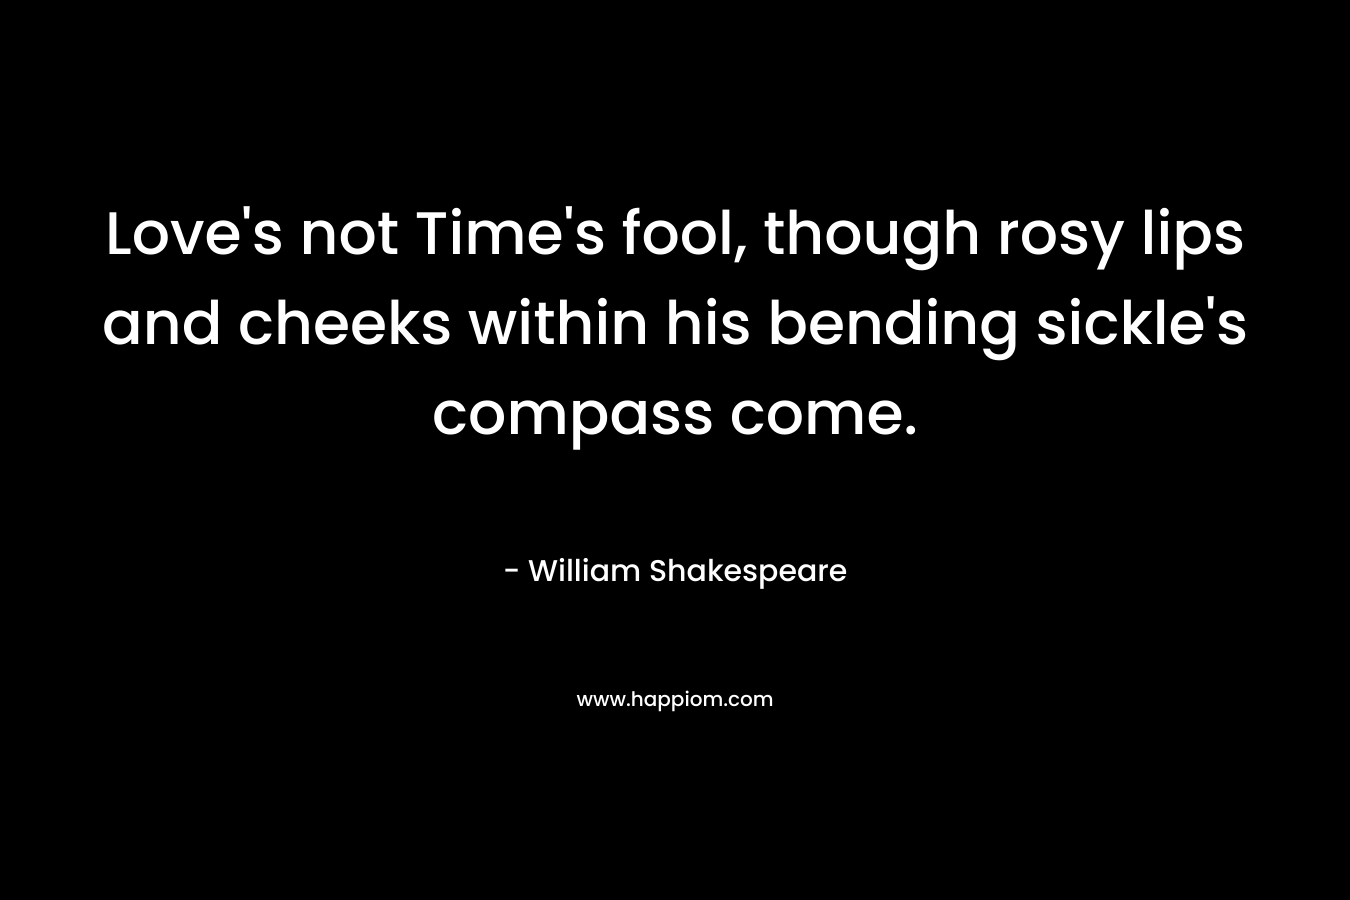 Love's not Time's fool, though rosy lips and cheeks within his bending sickle's compass come.